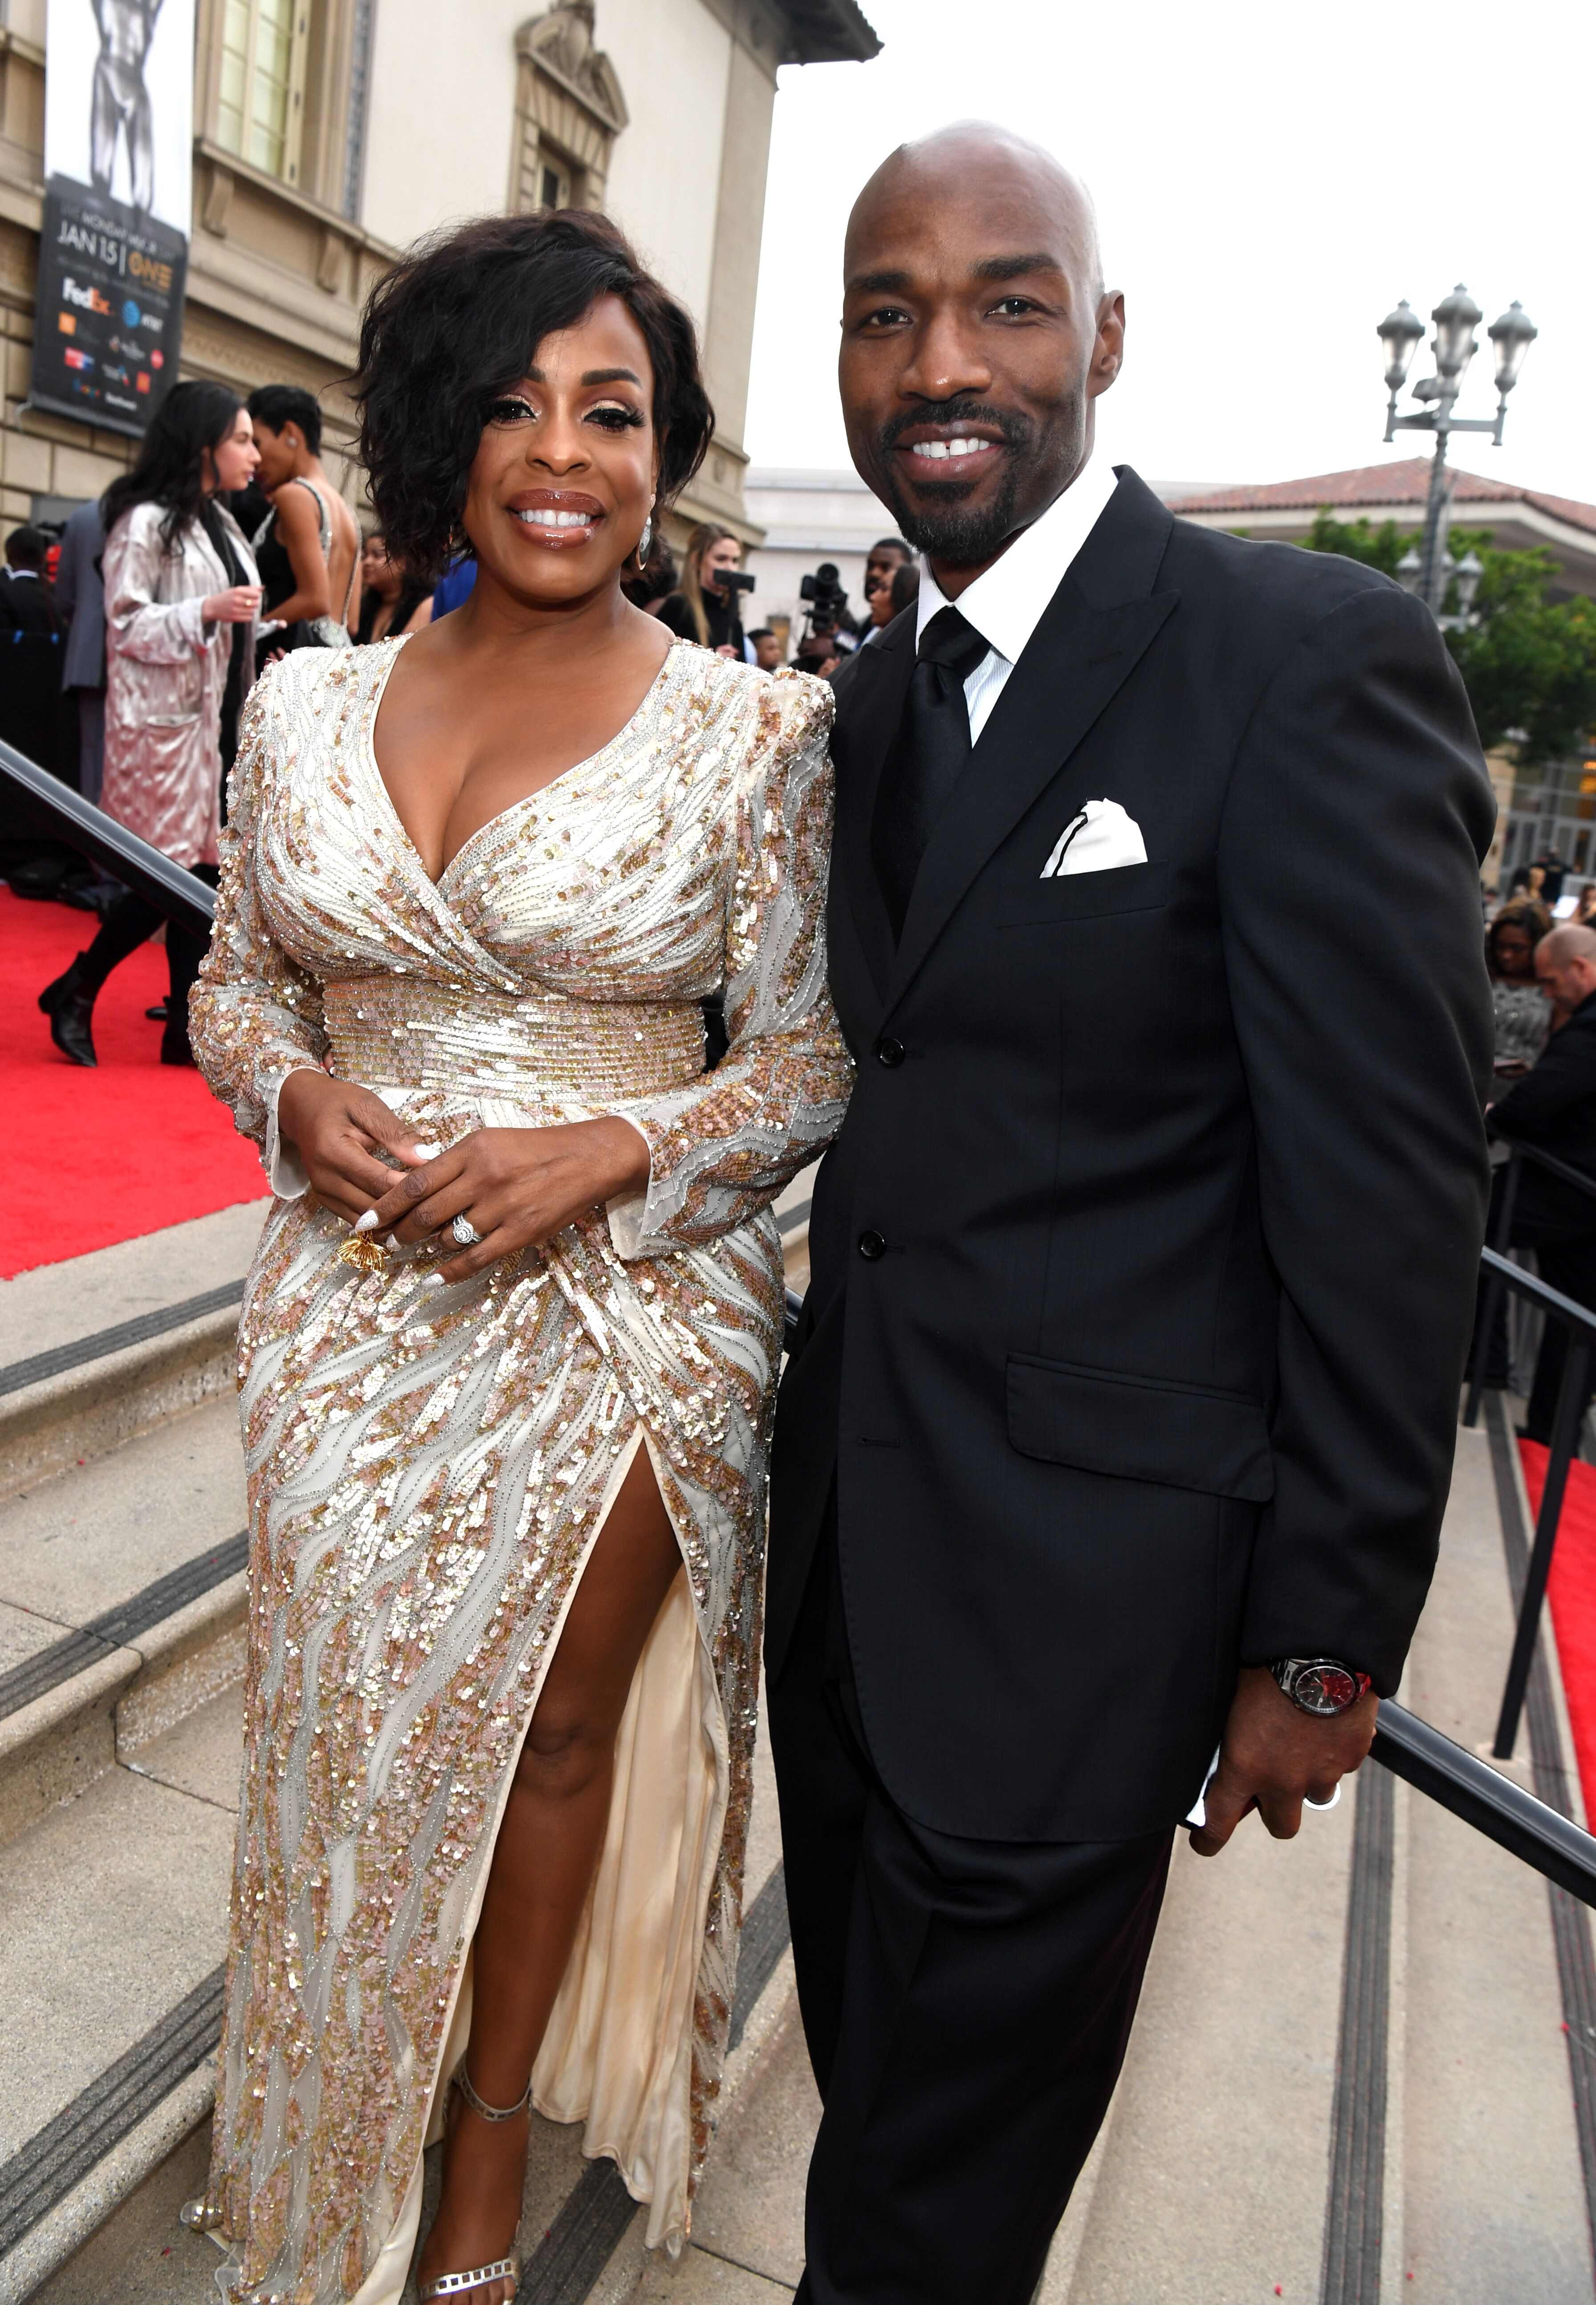 Jay Tucker and actress Niecy Nash and her guest attend the 21st Annual NAACP Theatre Awards at the Directors Guild of America on August 29, 2011 in Hollywood, California | Photo: Getty Images